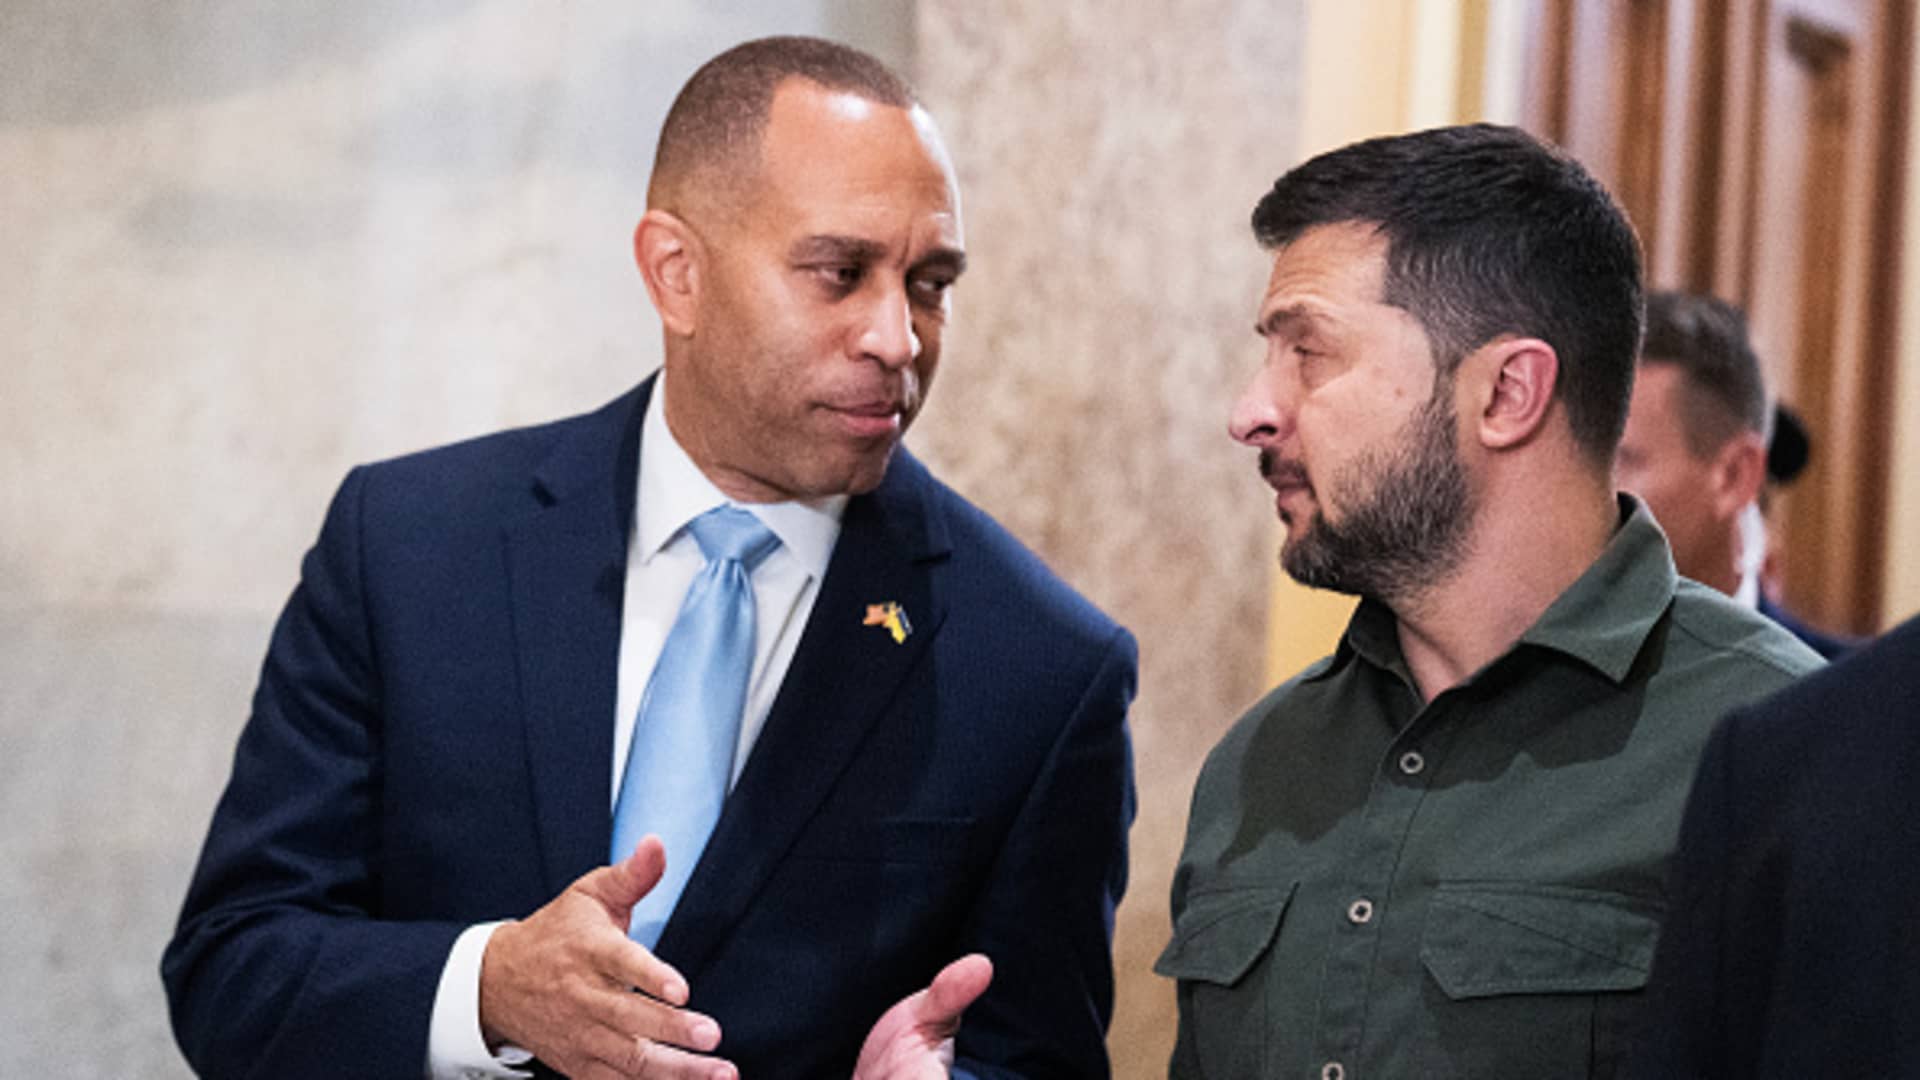 Ukrainian President Volodymyr Zelenskyy arrives to the U.S. Capitol with House Minority Leader Hakeem Jeffries, D-N.Y., left, for a meeting with House members on Thursday, September 21, 2023.